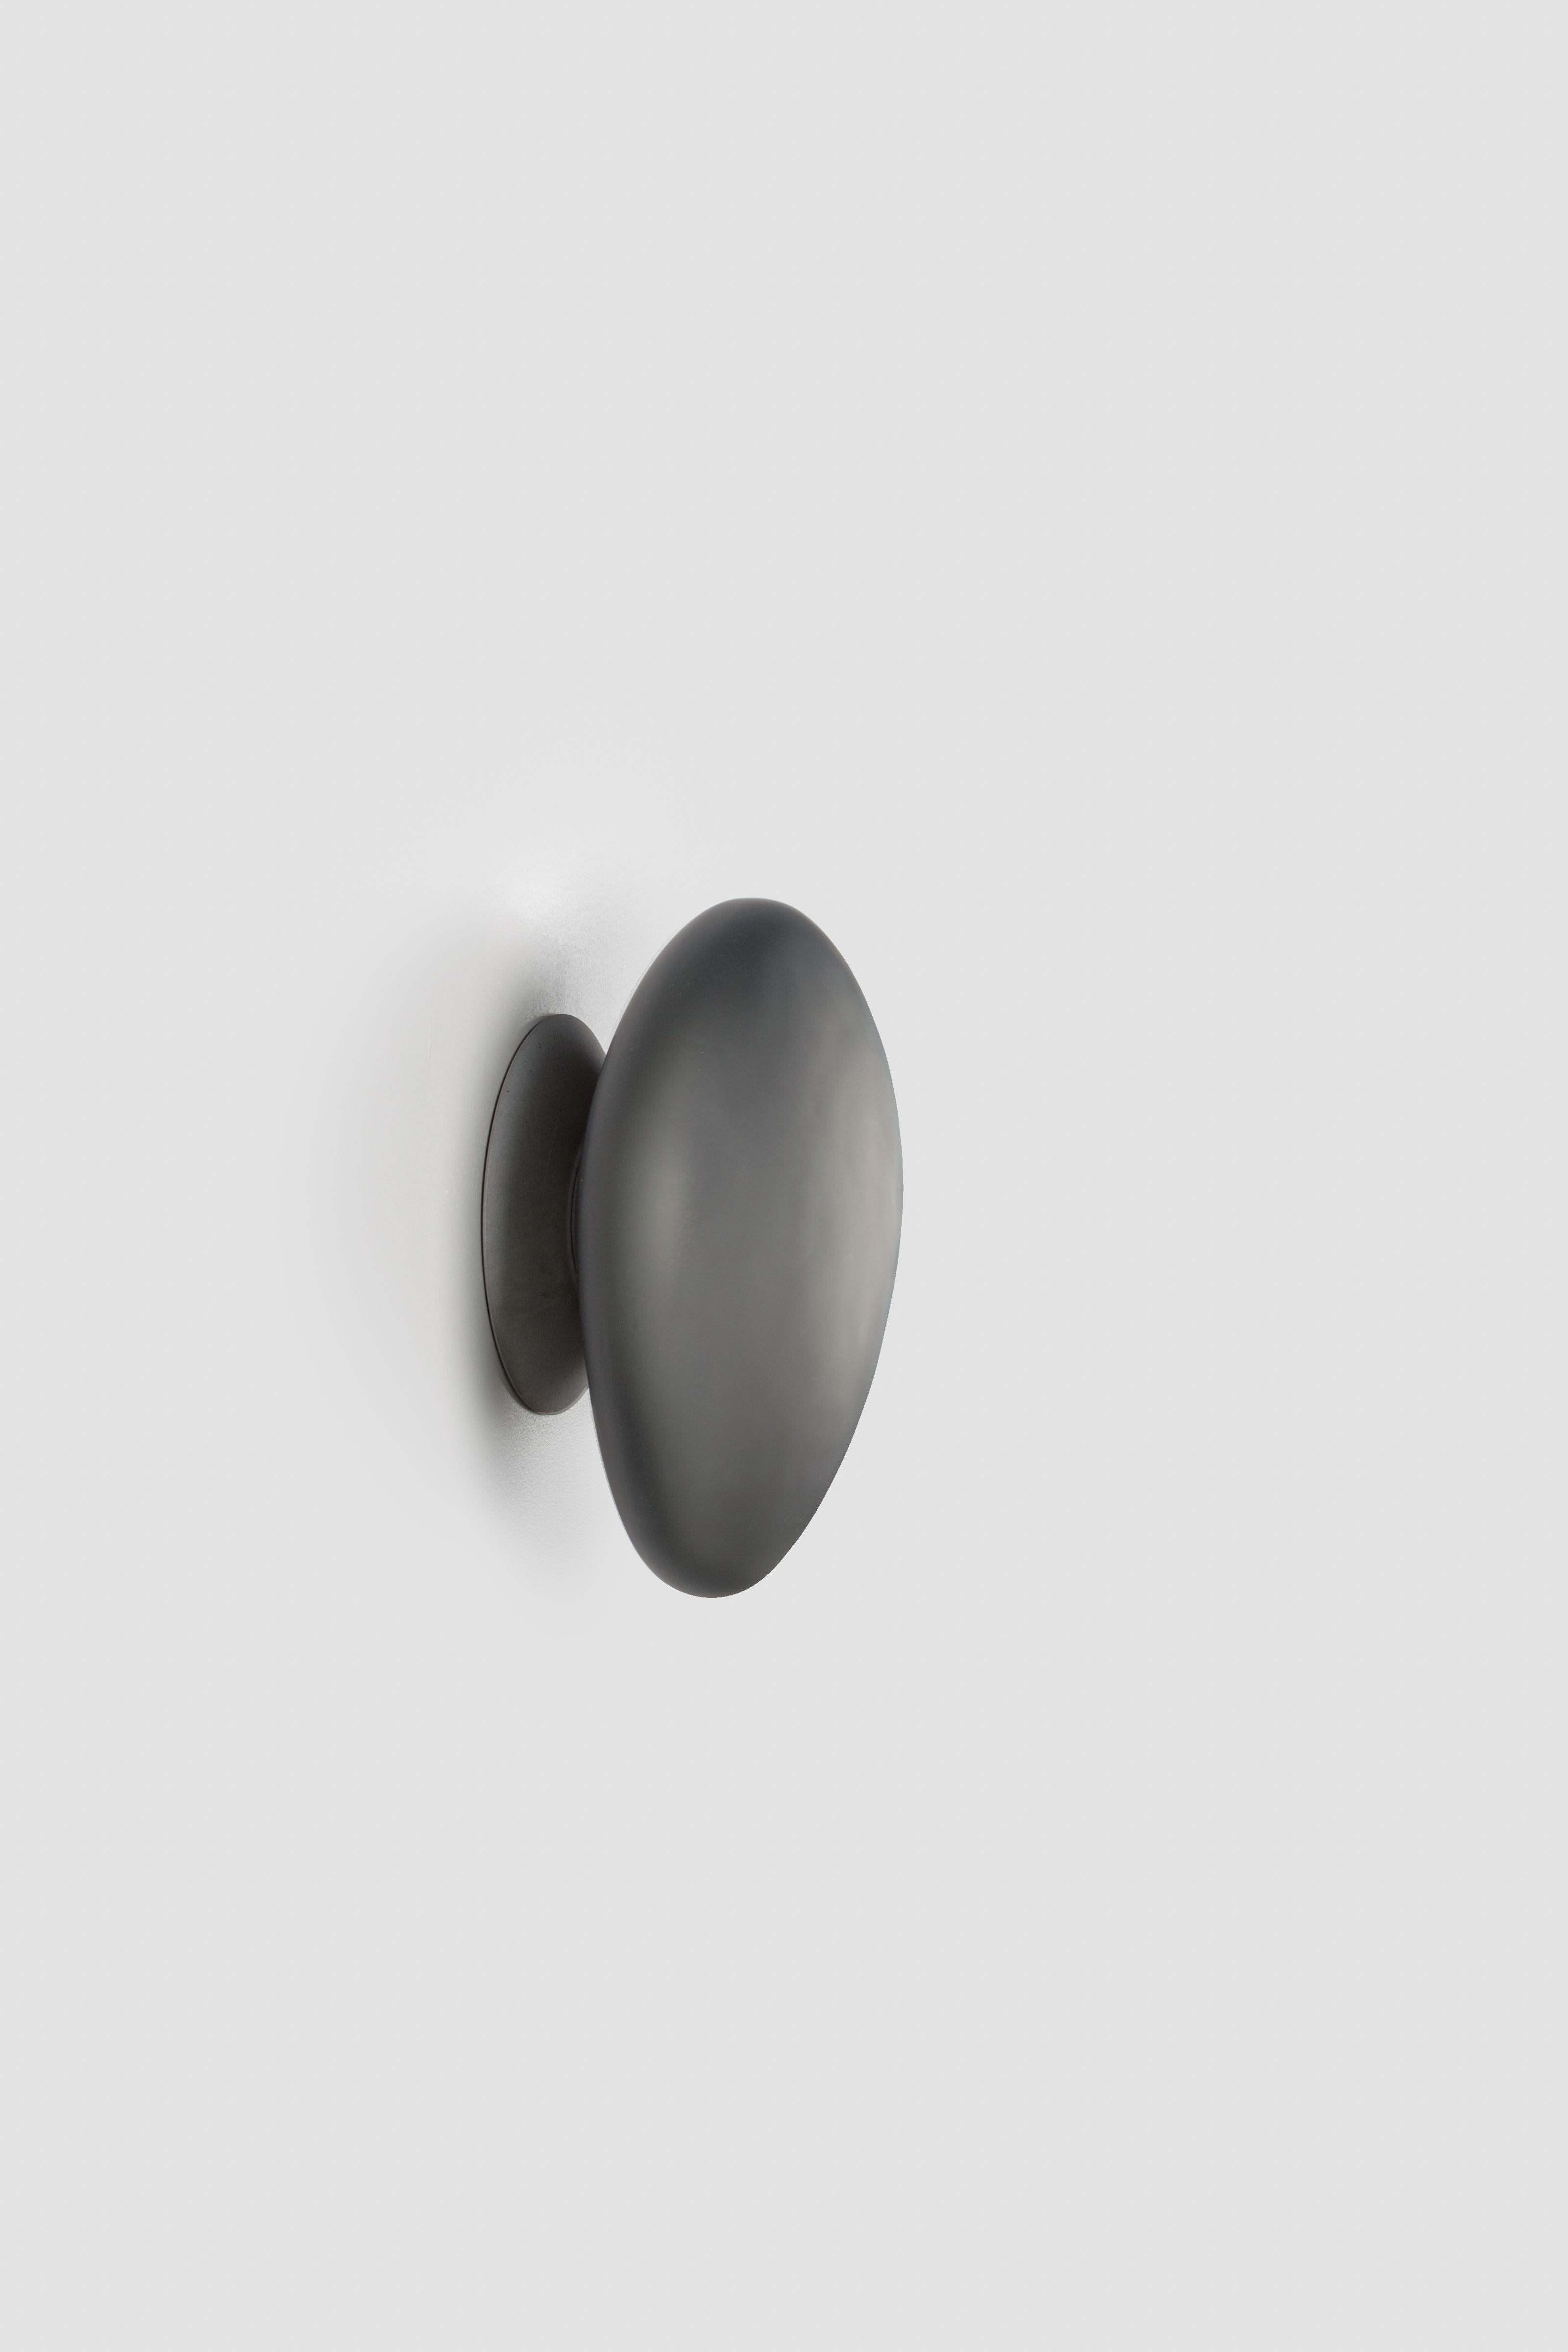 Contemporary Wall Lamp 'Pebble' by ANDlight, Shape C, Grey Slate For Sale 1